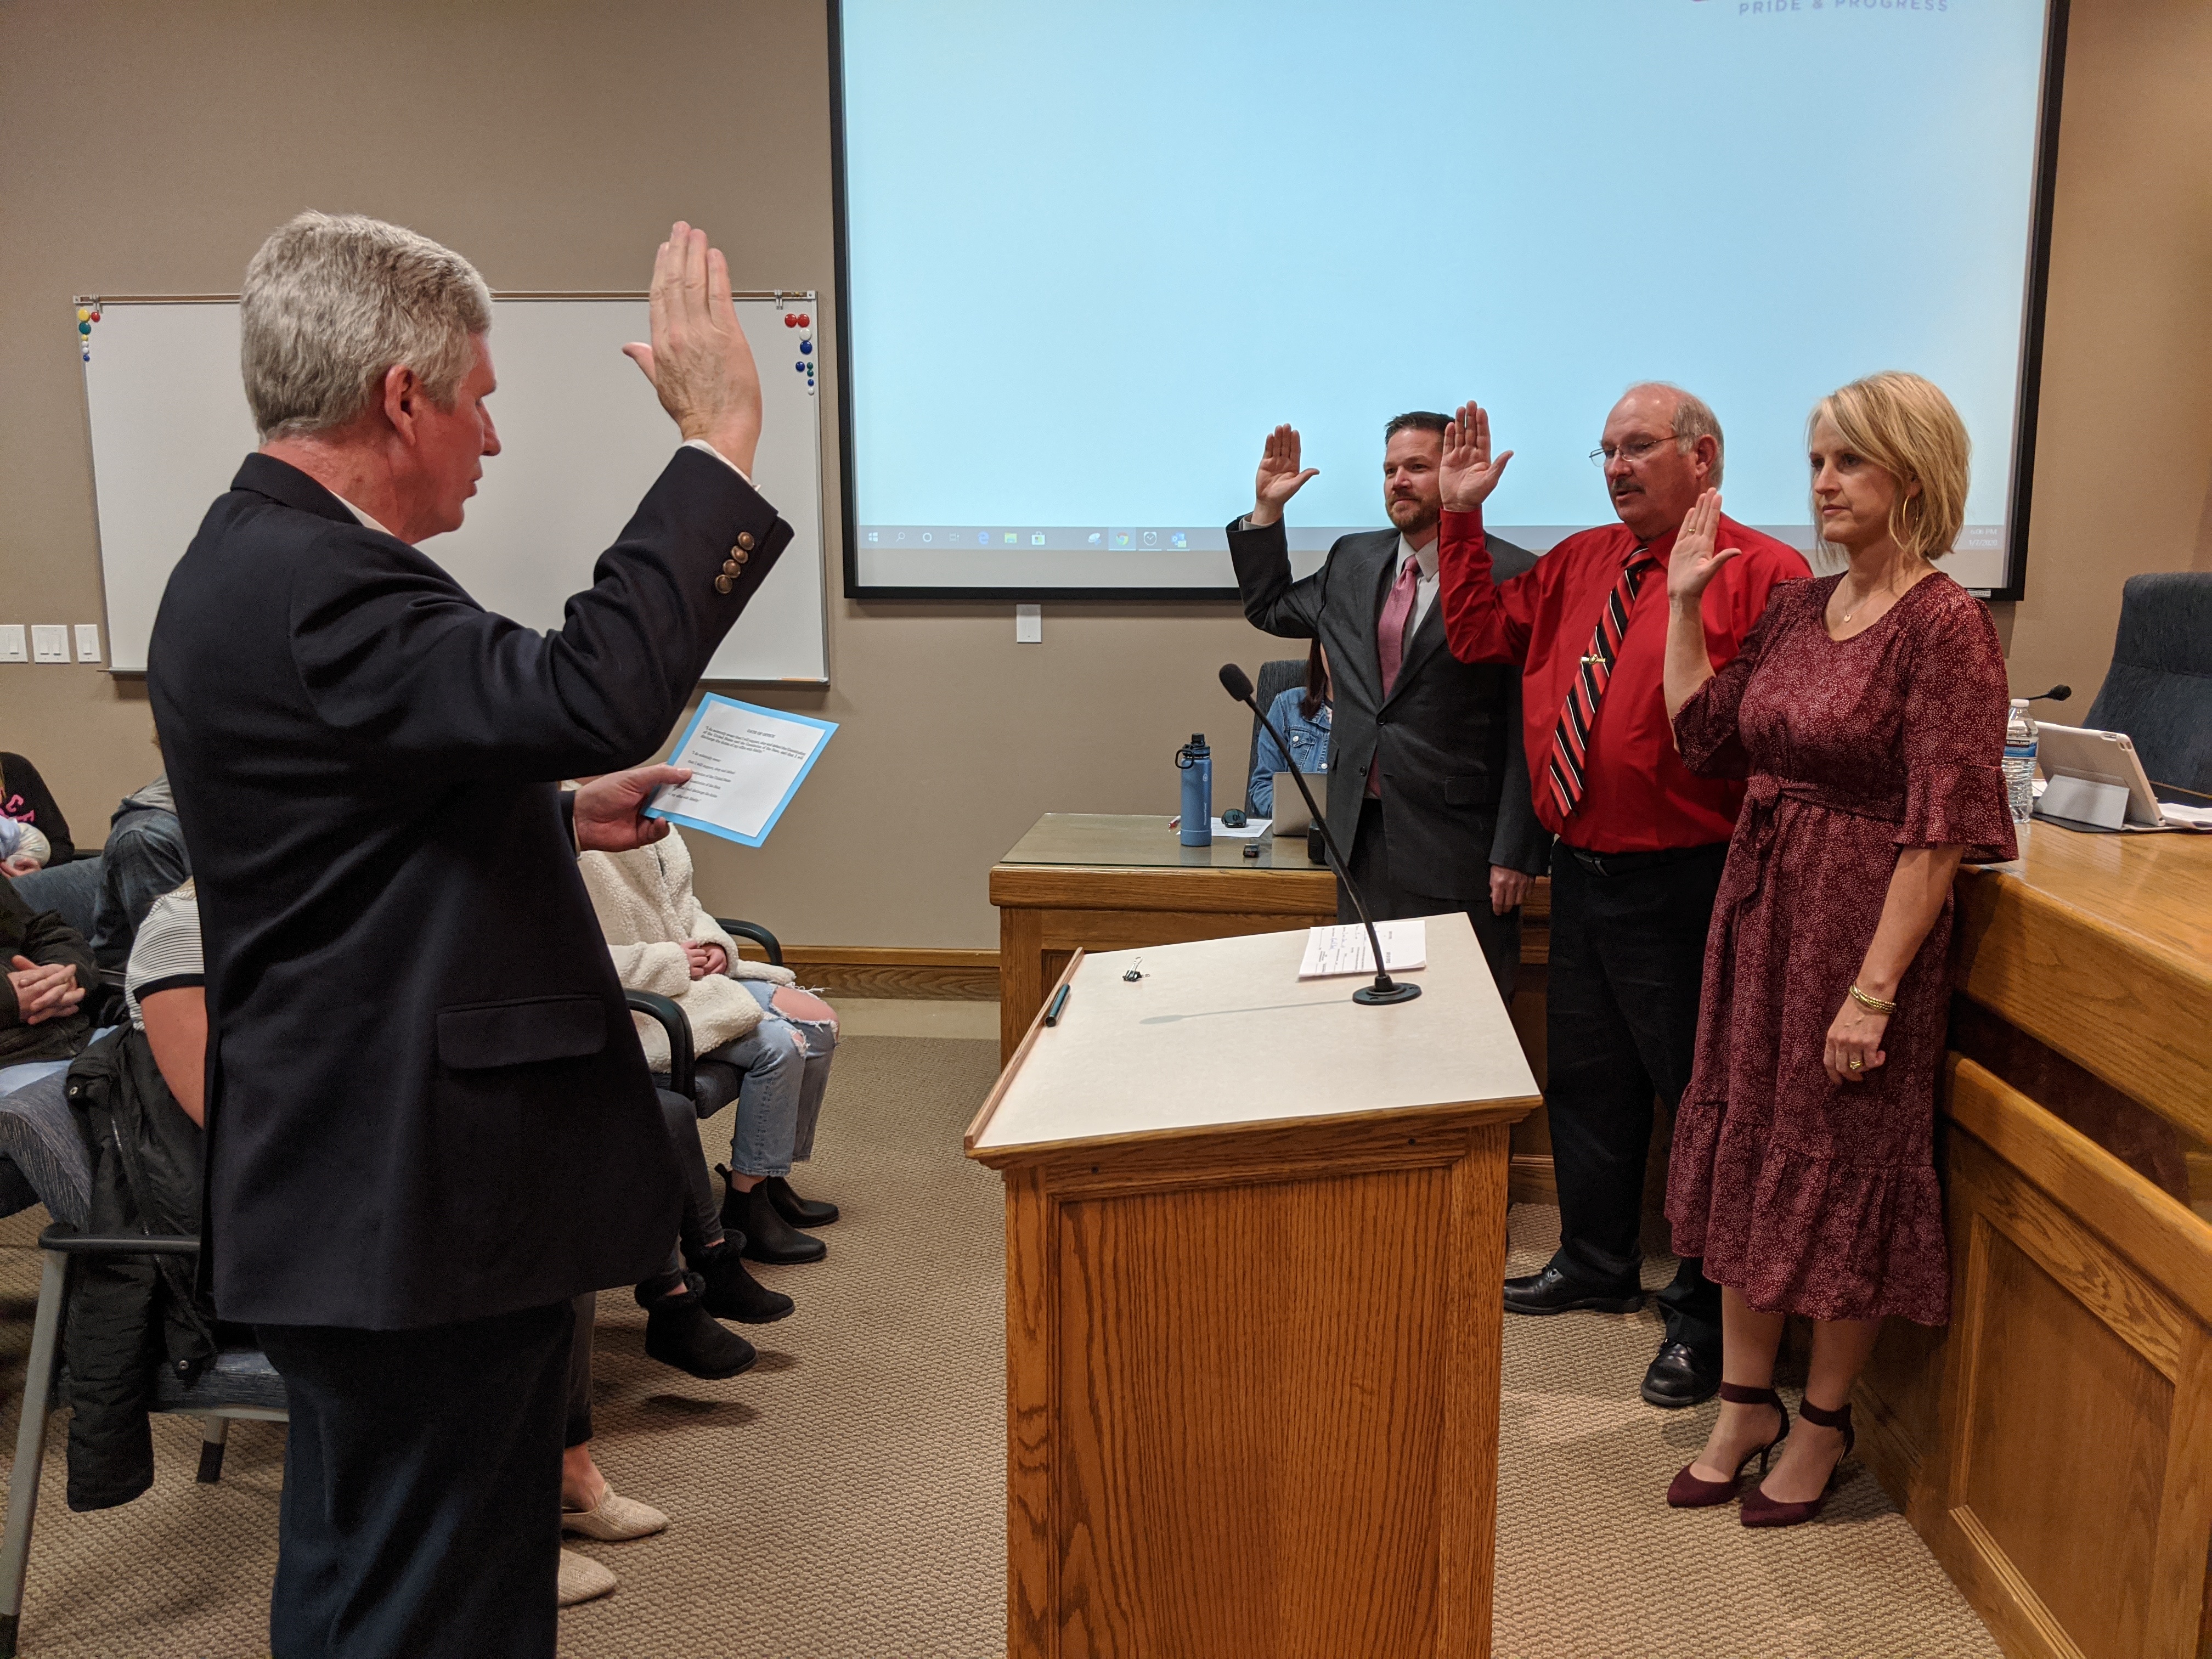 City Council Members Stacy Beck, Chard Argyle, and Brandon Gordon take the Oath of Office, as administered by City Recorder Kent Clark.